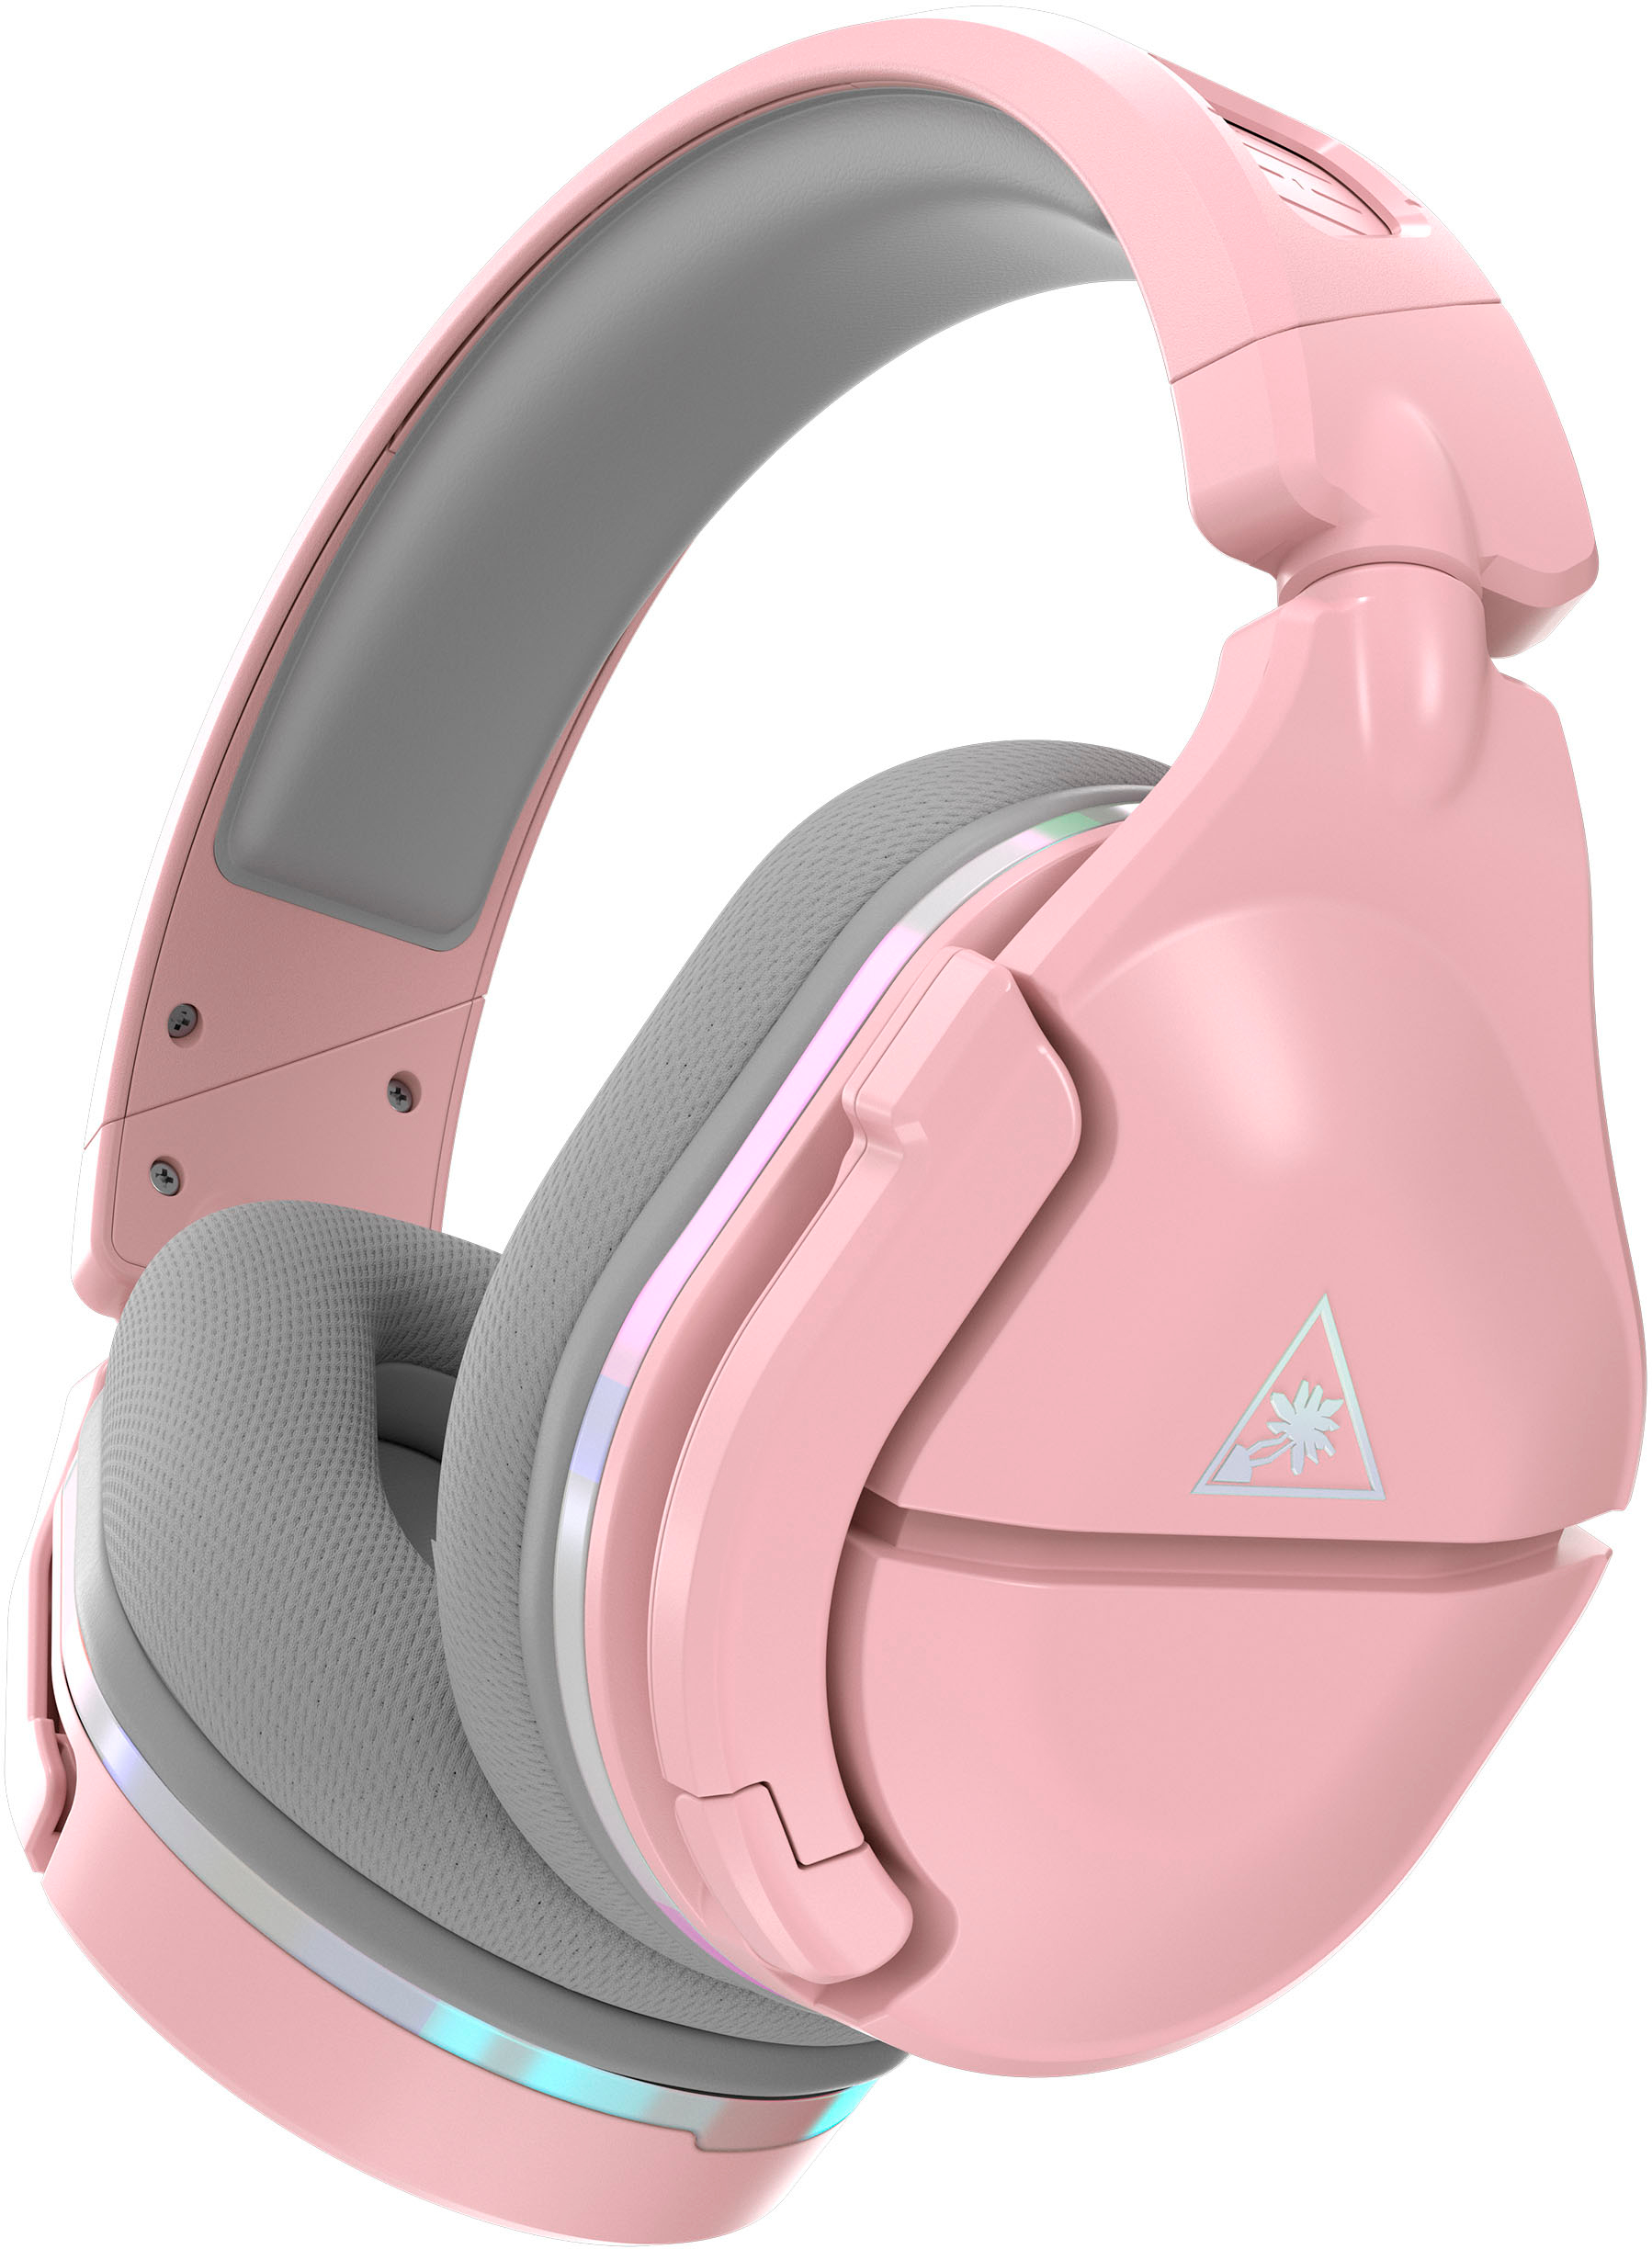 Turtle Beach Stealth 600 Gen 2 MAX Wireless Multiplatform Gaming Headset  for Xbox, PS5, PS4, Nintendo Switch and PC 48 Hour Battery Pink TBS-2380-05  - Best Buy